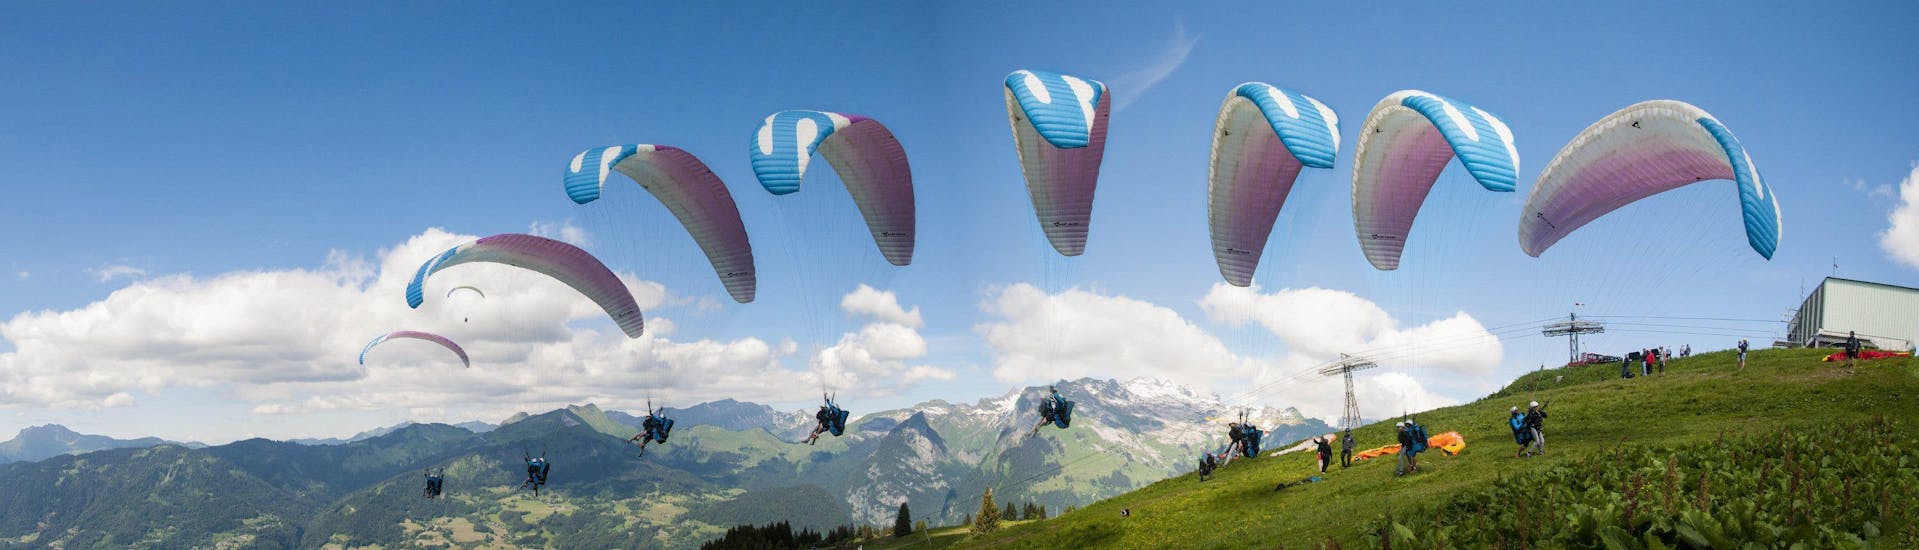 A paragliding pilot from Pegase Air is taking off from one of the moutains surrounding Samoens for a Tandem Paragliding Flight "Discovery".